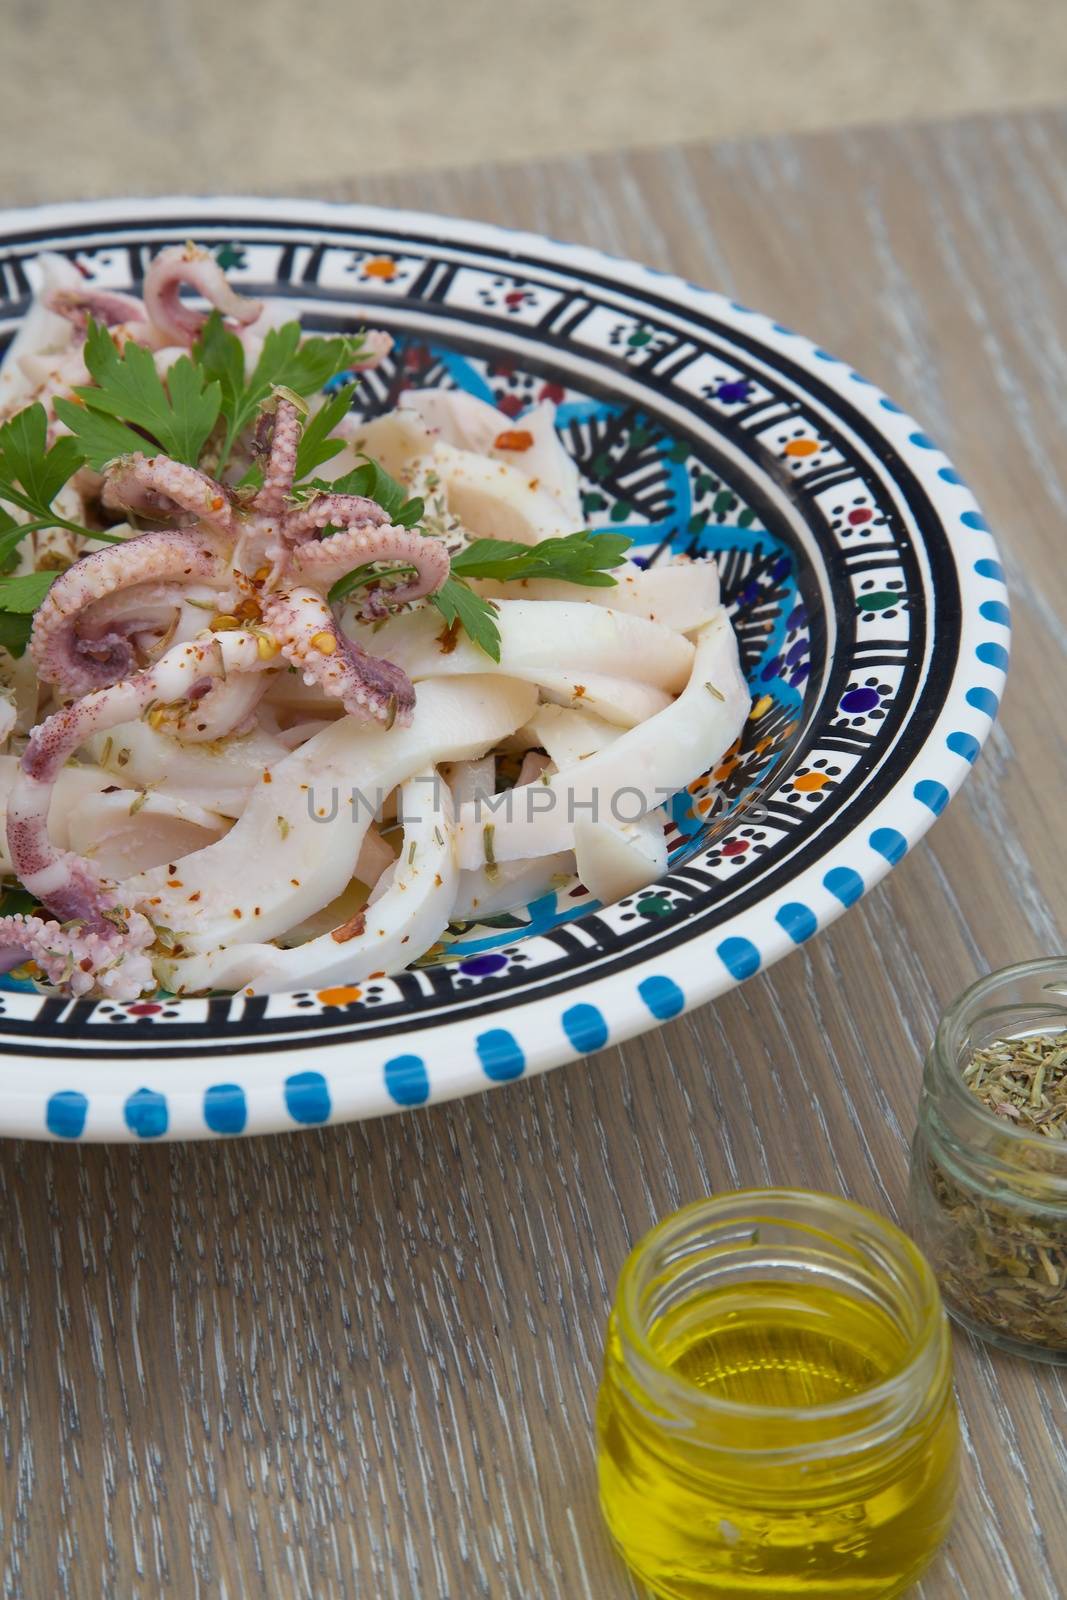 Marinated squid salad with fresh parsley in the traditional Tunisian plate. Oregano, olive oil and squeezed lemon in the background